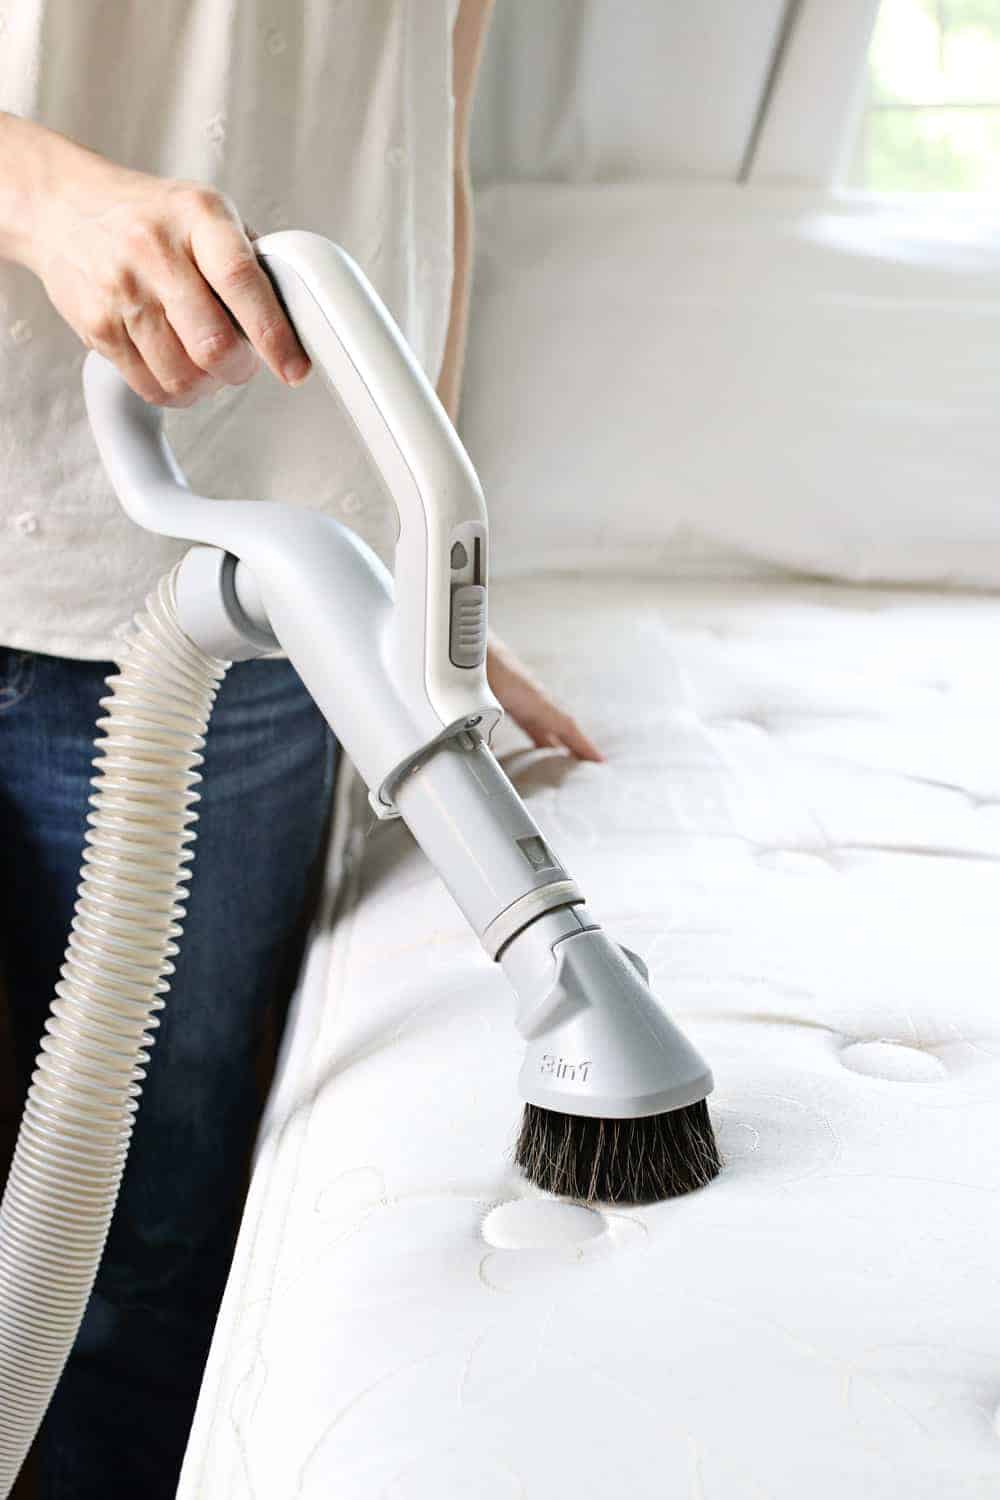 How to Clean a Mattress in 6 Simple Steps